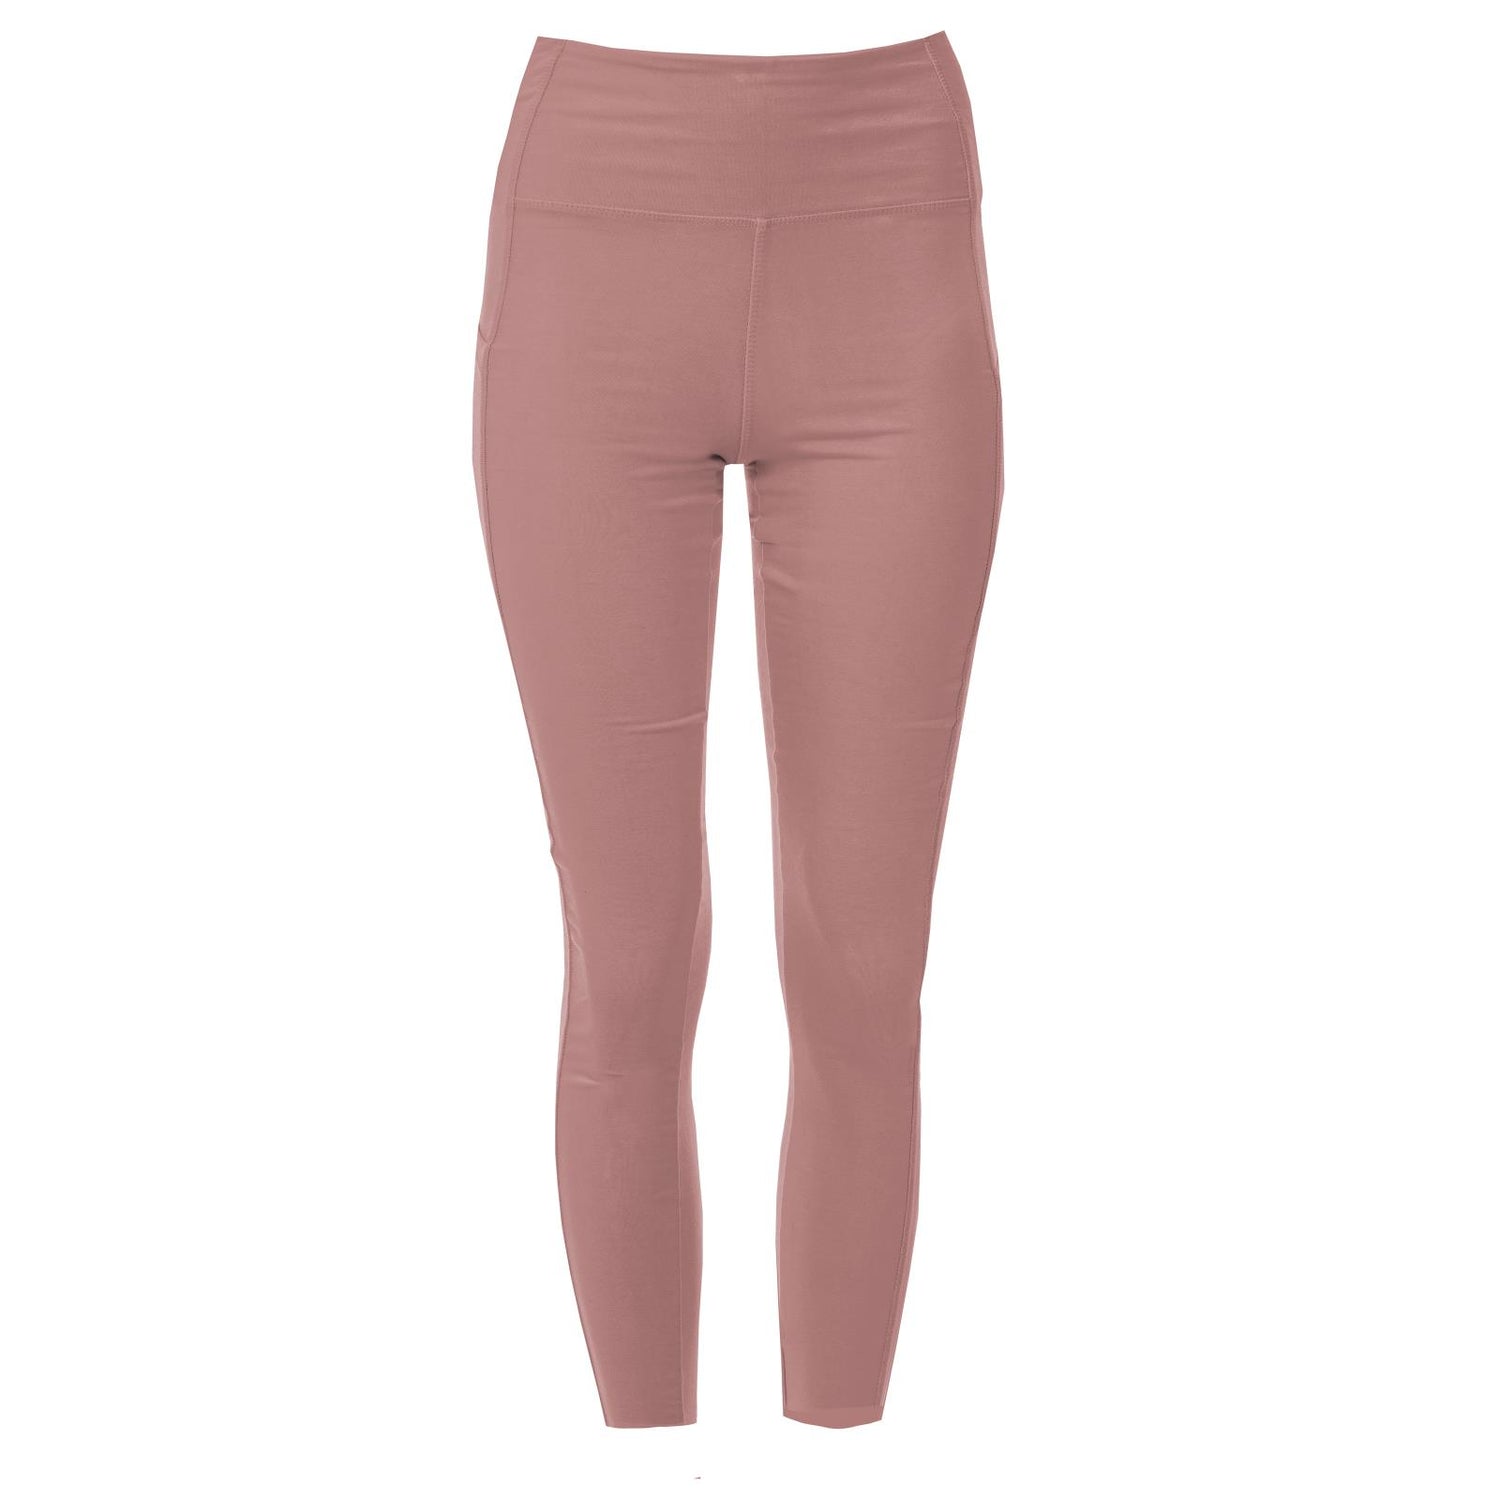 Women's Luxe Stretch 7/8 Leggings with Pockets in Antique Pink